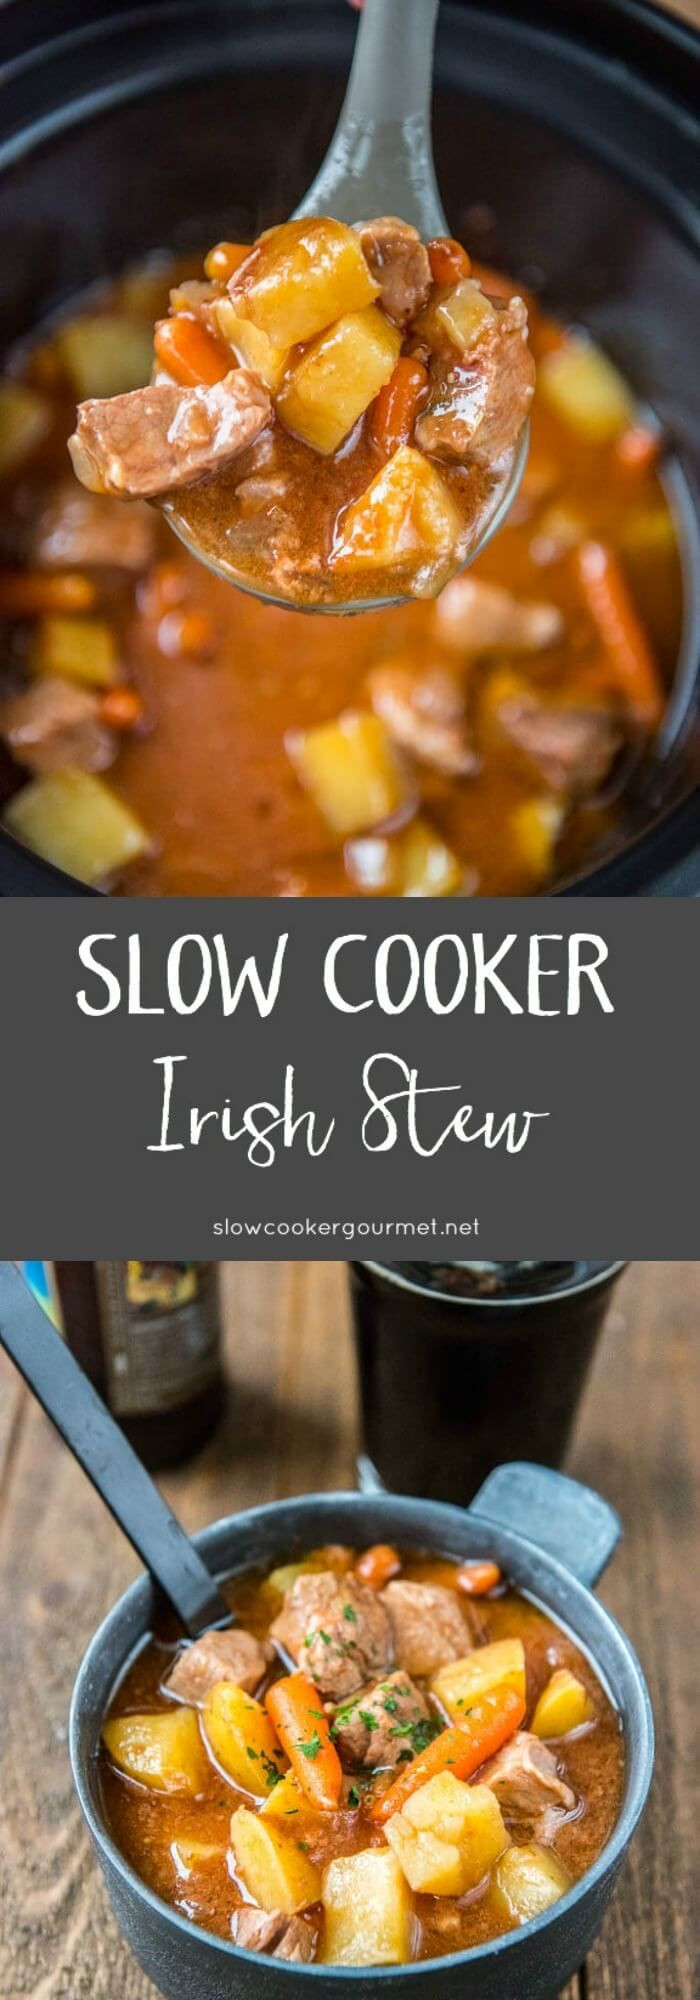 Pork Shoulder Slow Cooker Beer
 The perfect simple and hearty meal Slow Cooker Irish Stew